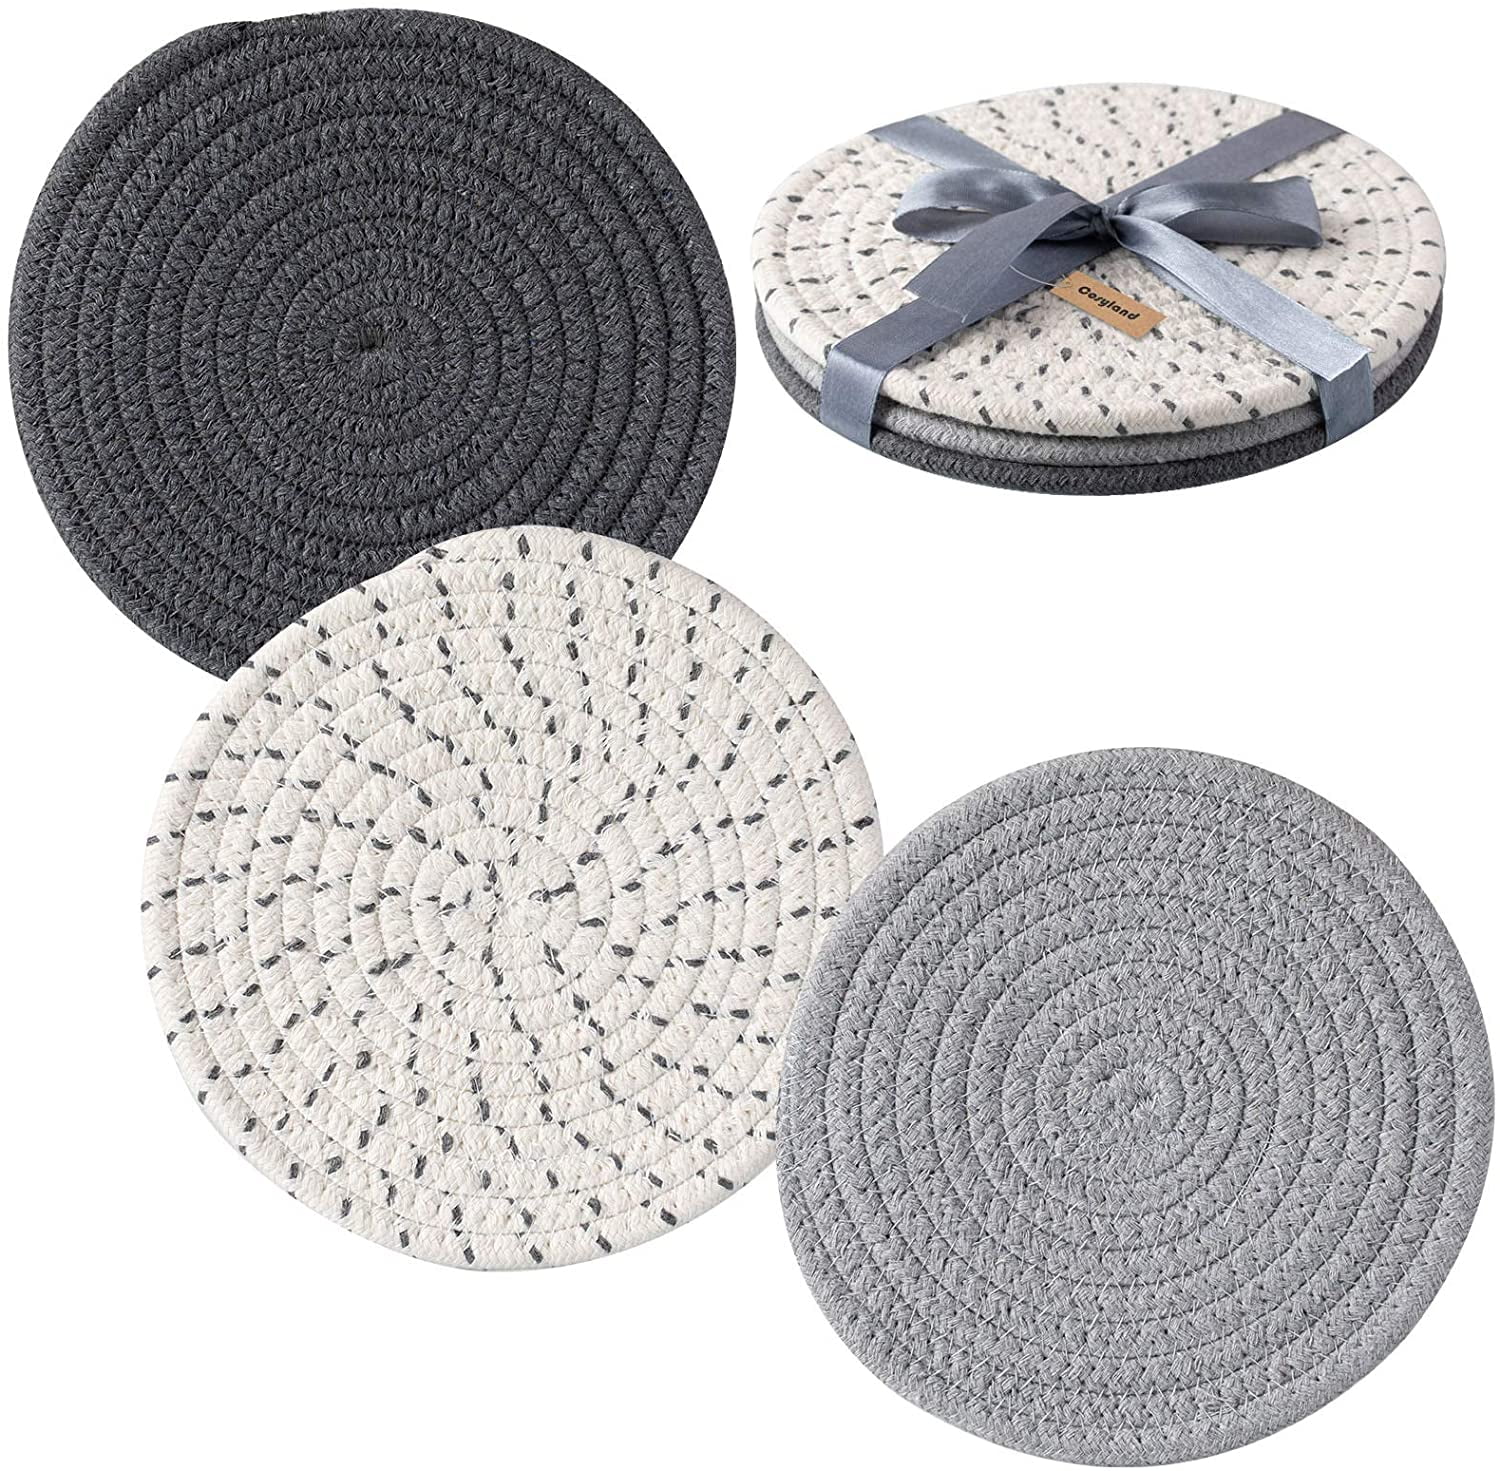 Hot Pads Diameter 7 Inches Jar Opener & Coasters Set of 3 Round Grey Set Spoon Rest Pot Holders for Cooking and Baking 100% Cotton Thread Weave Pot Holders